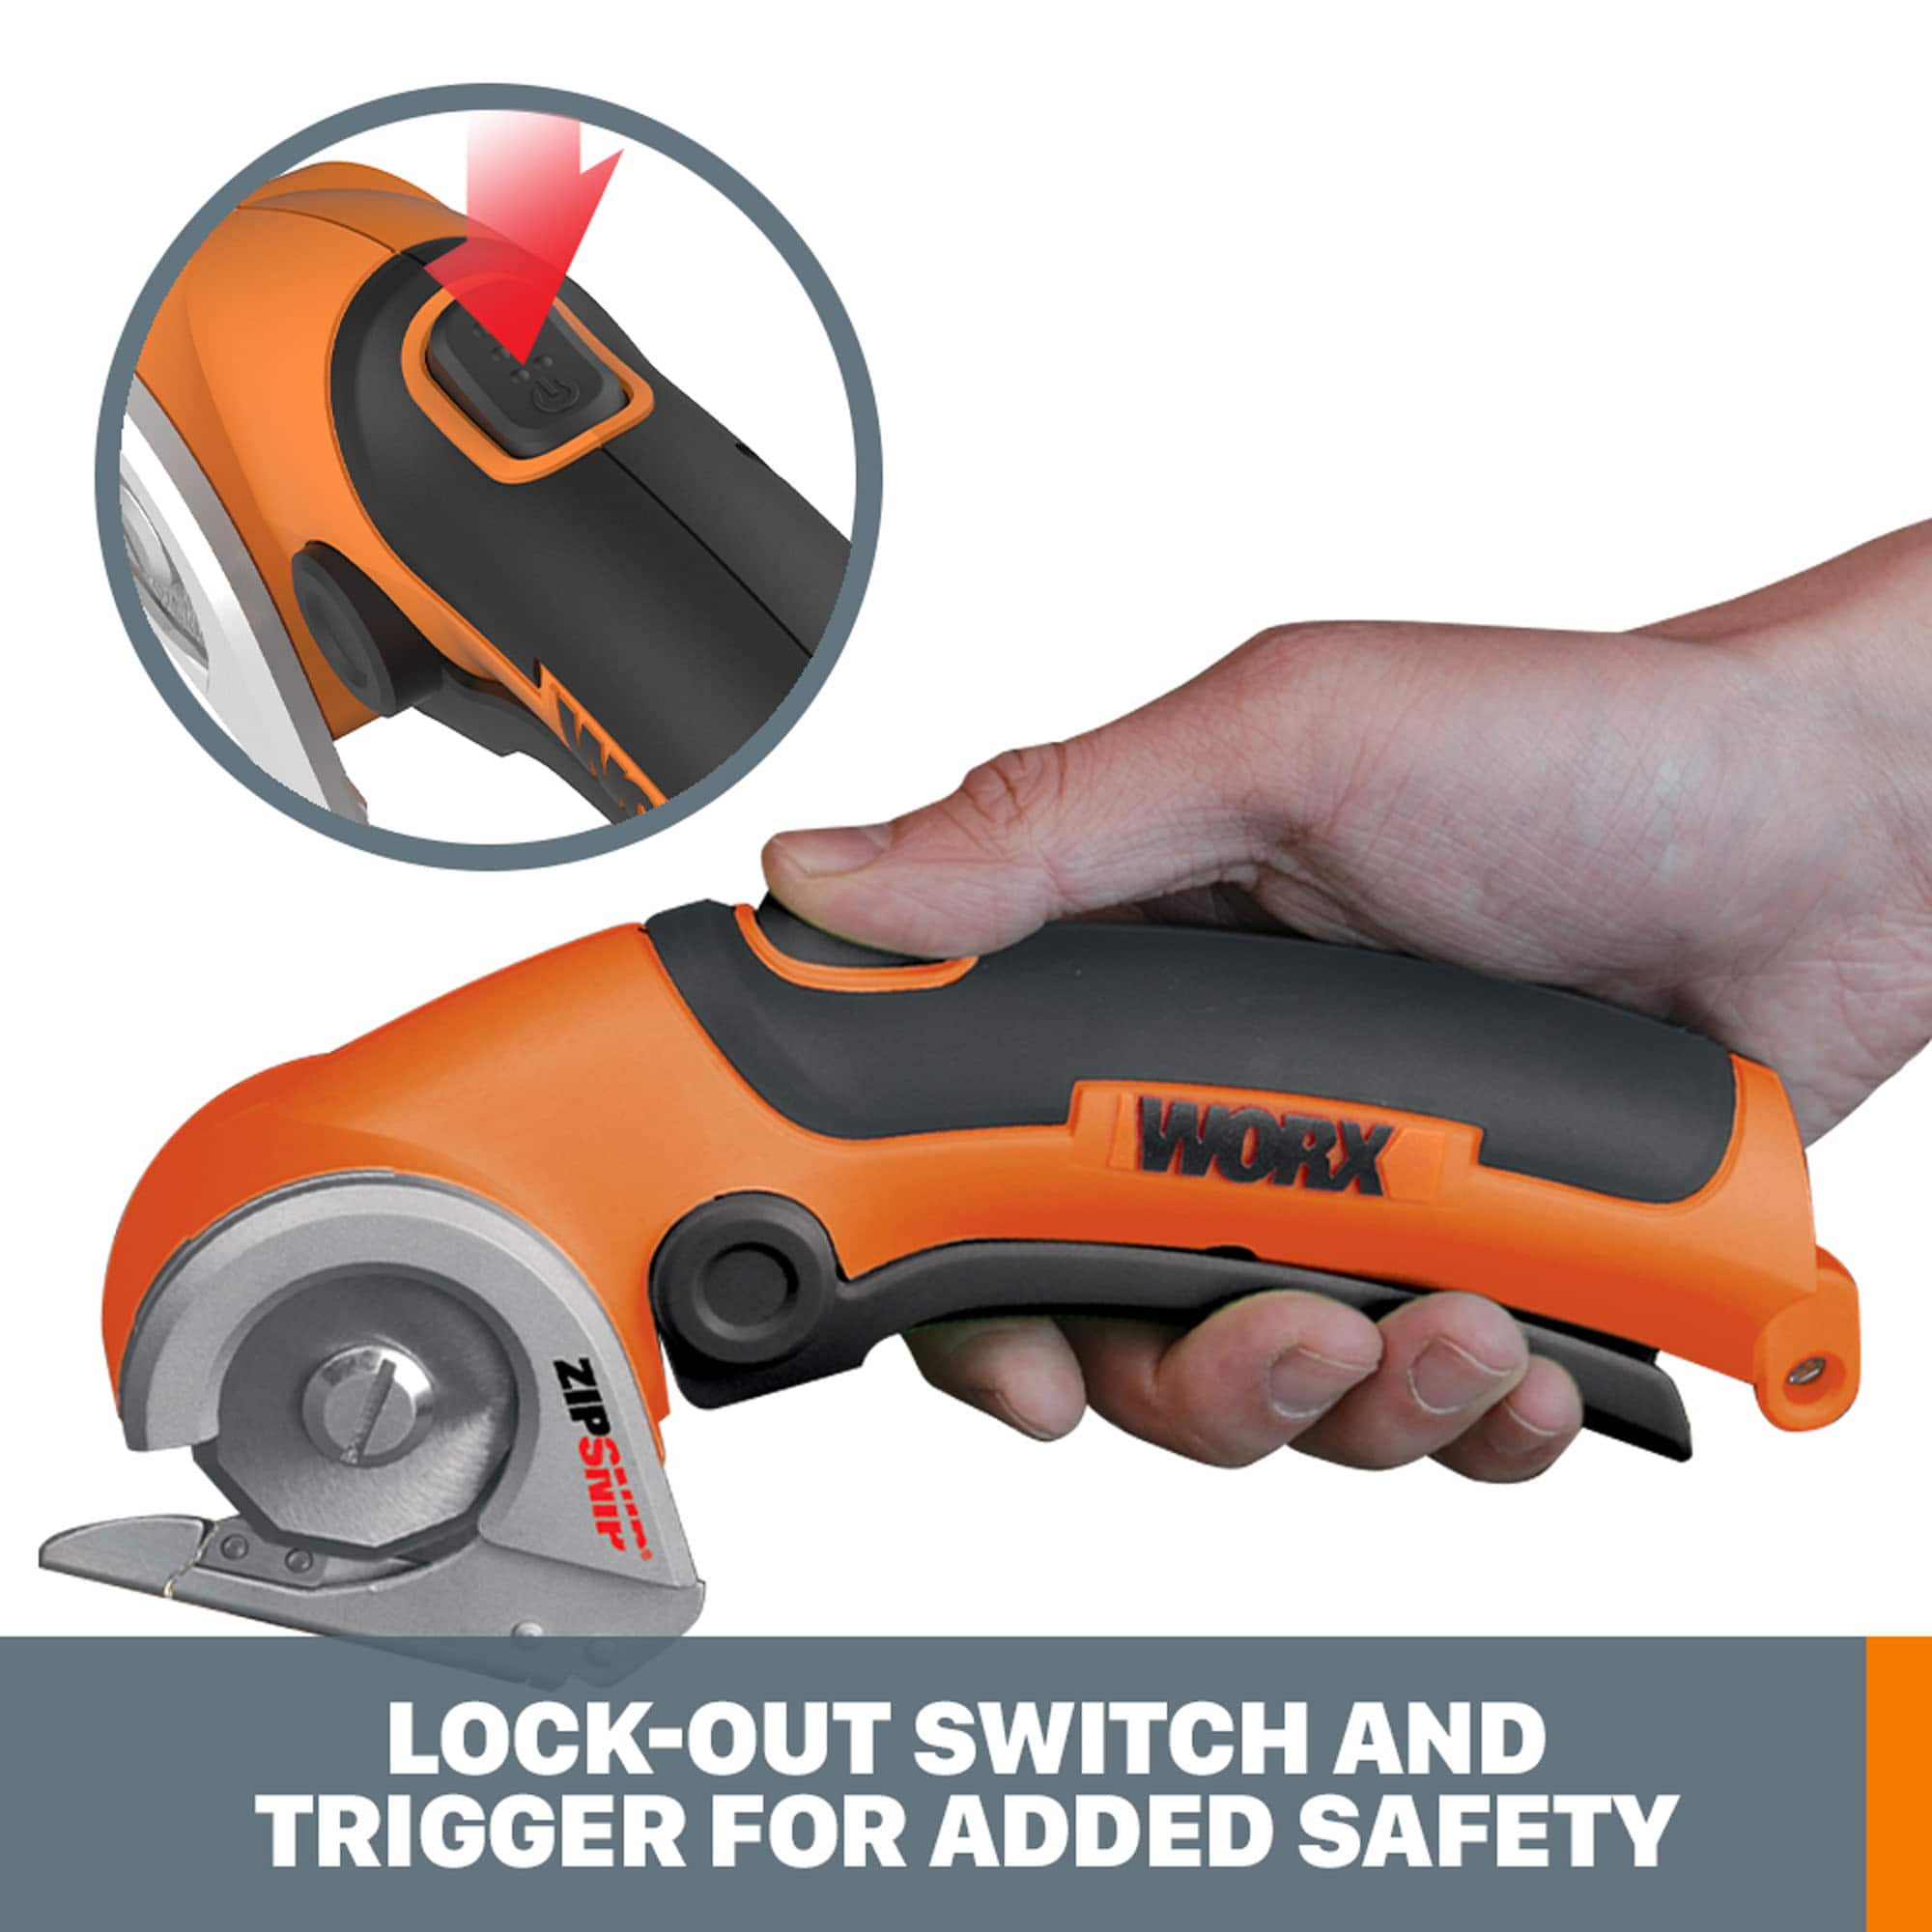 Reviews for Worx 1-1/2 in. 3.6 Lithium-Ion ZipSnip